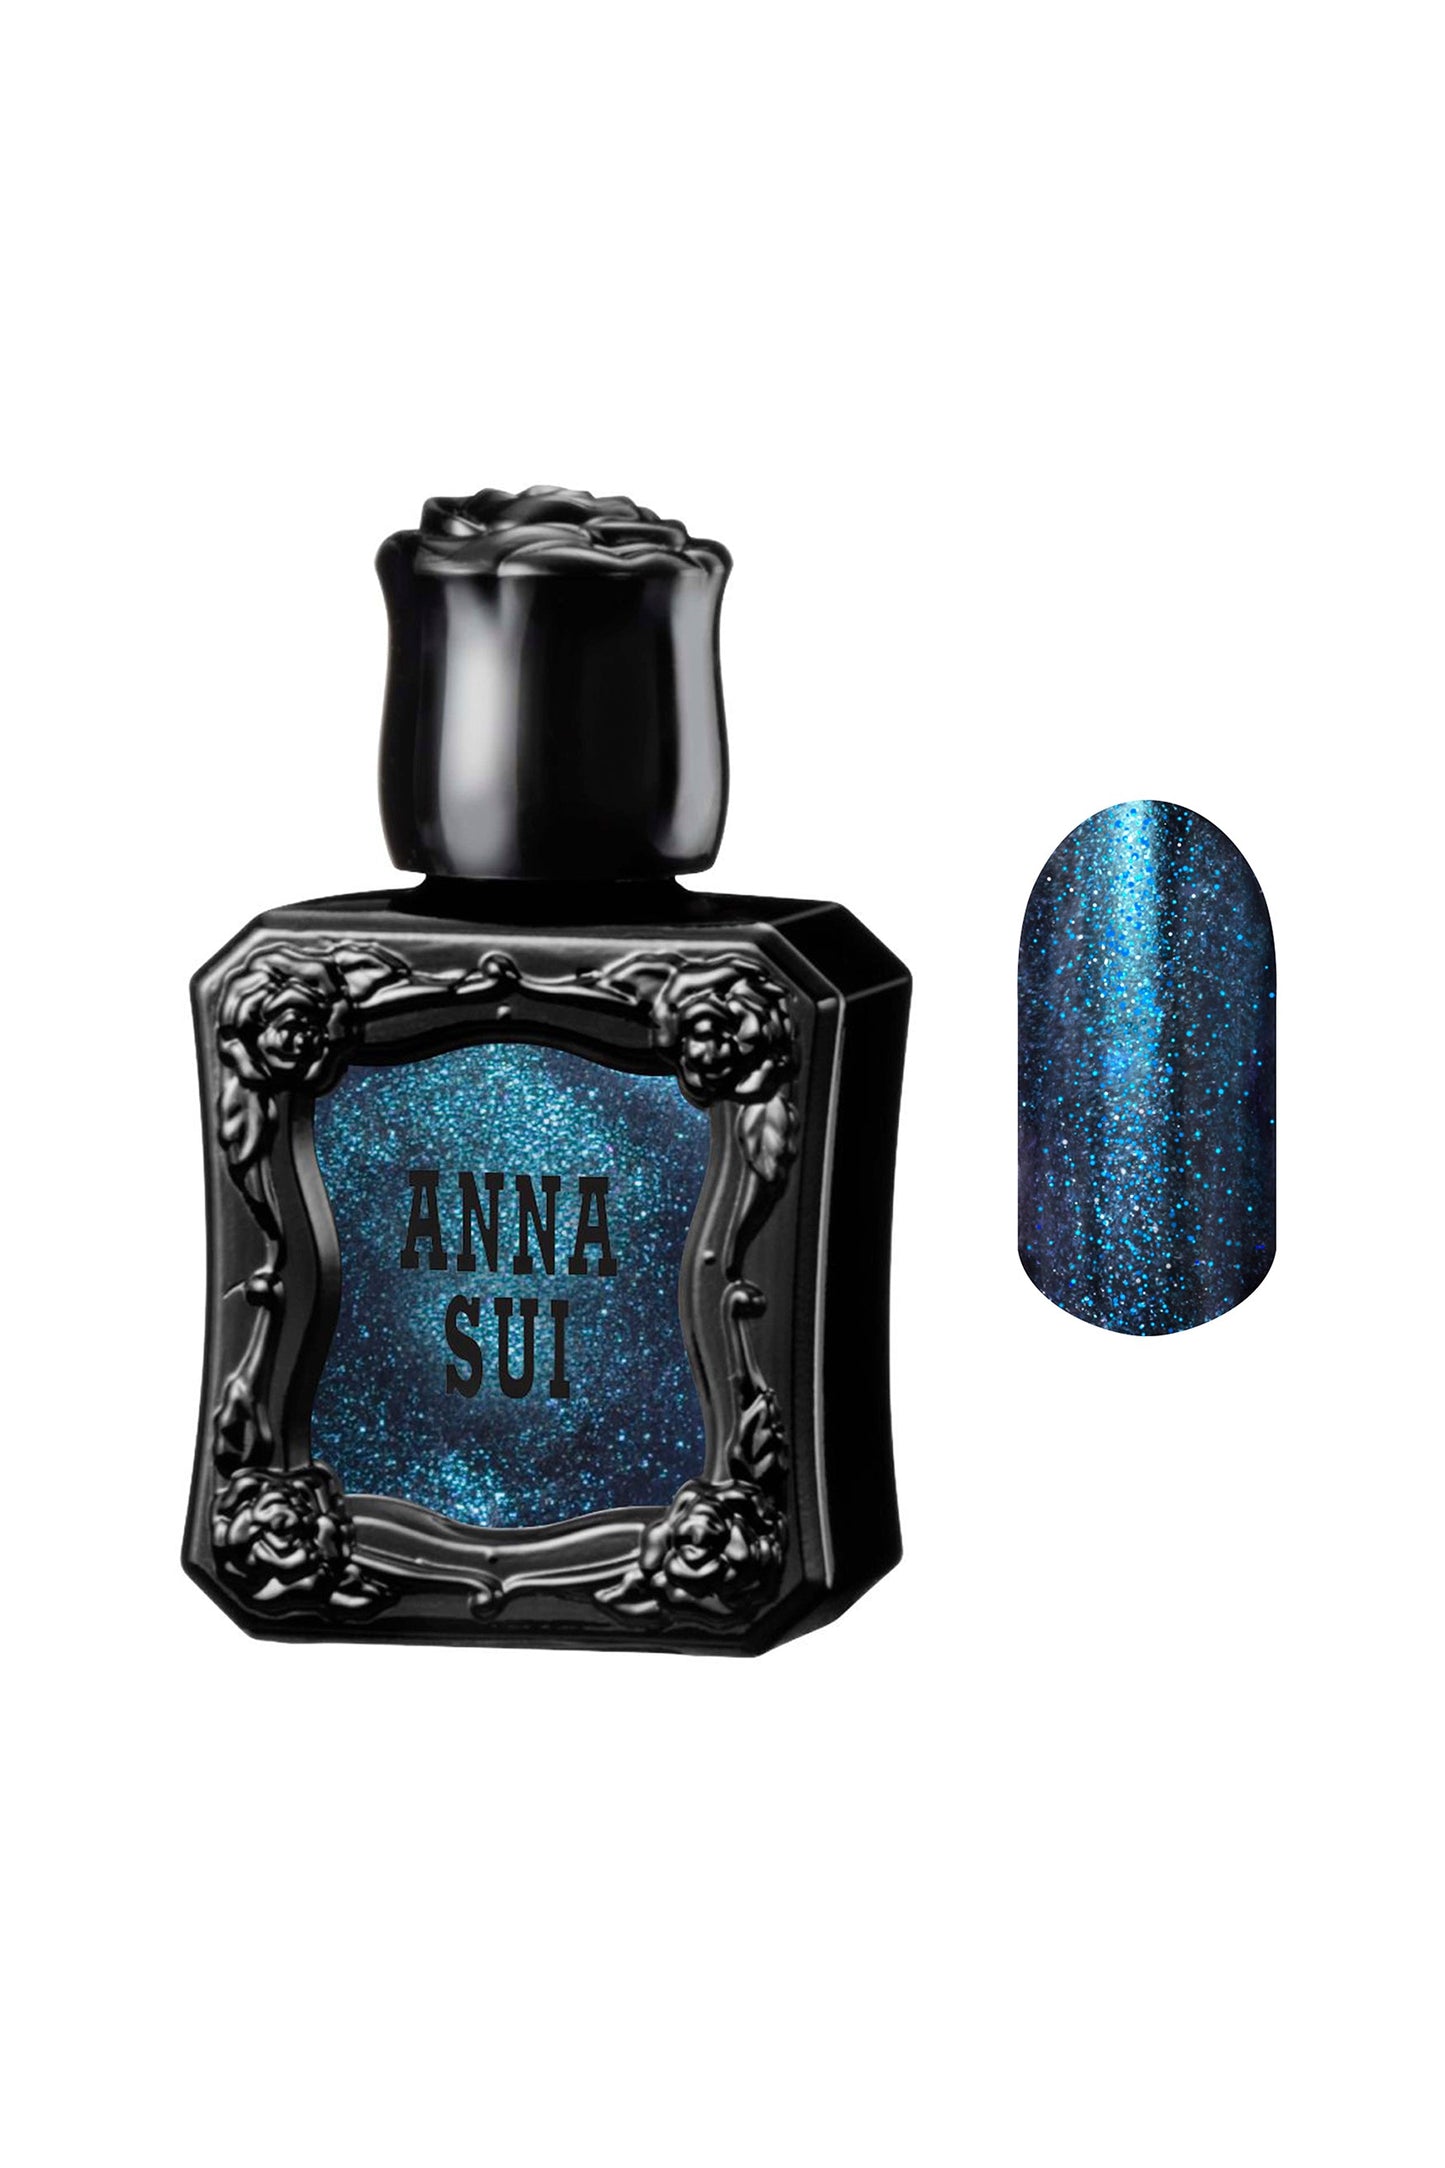 GALAXY BLUE Nail Polish bottle raised rose pattern, Anna Sui in black over nail colors in bottle front